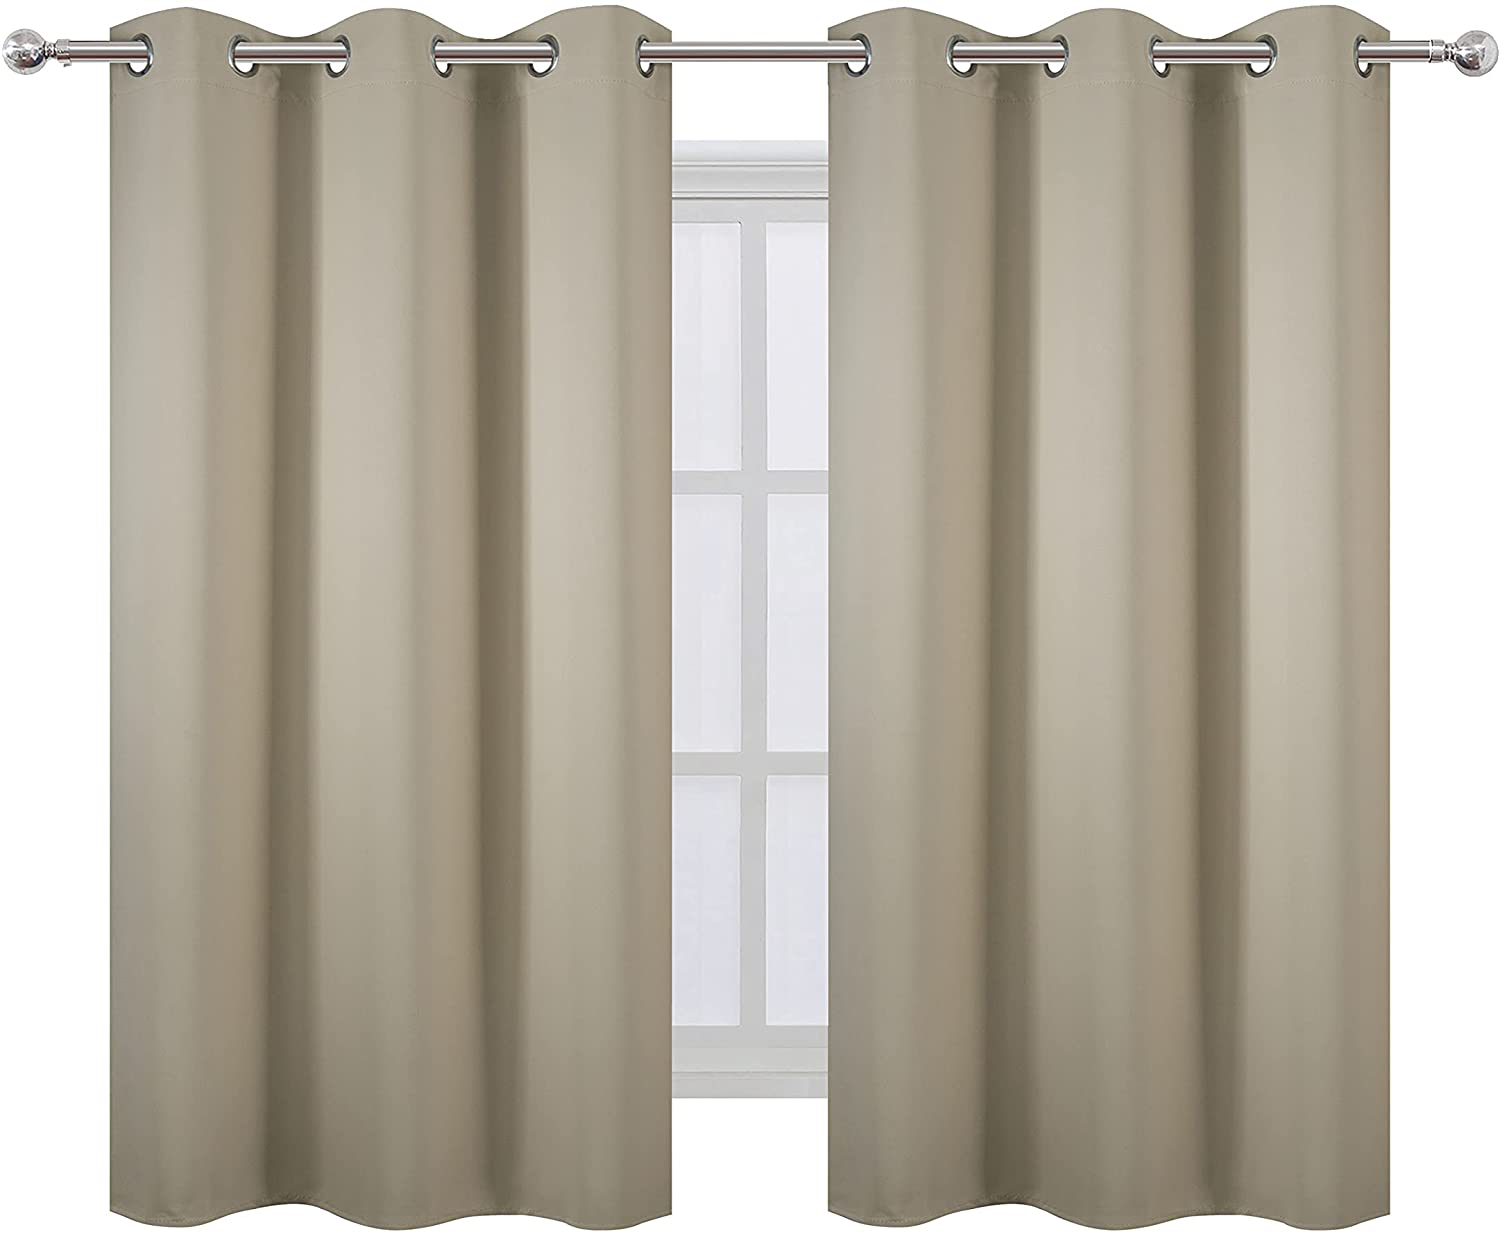 LEMOMO Grey Blackout Curtains for Bedroom Room Darkening Curtains/Draperies Thermal Insulated Living Room Curtains Gray Curtains Set of 2 Panels (38 x 54 Inch, Grey)